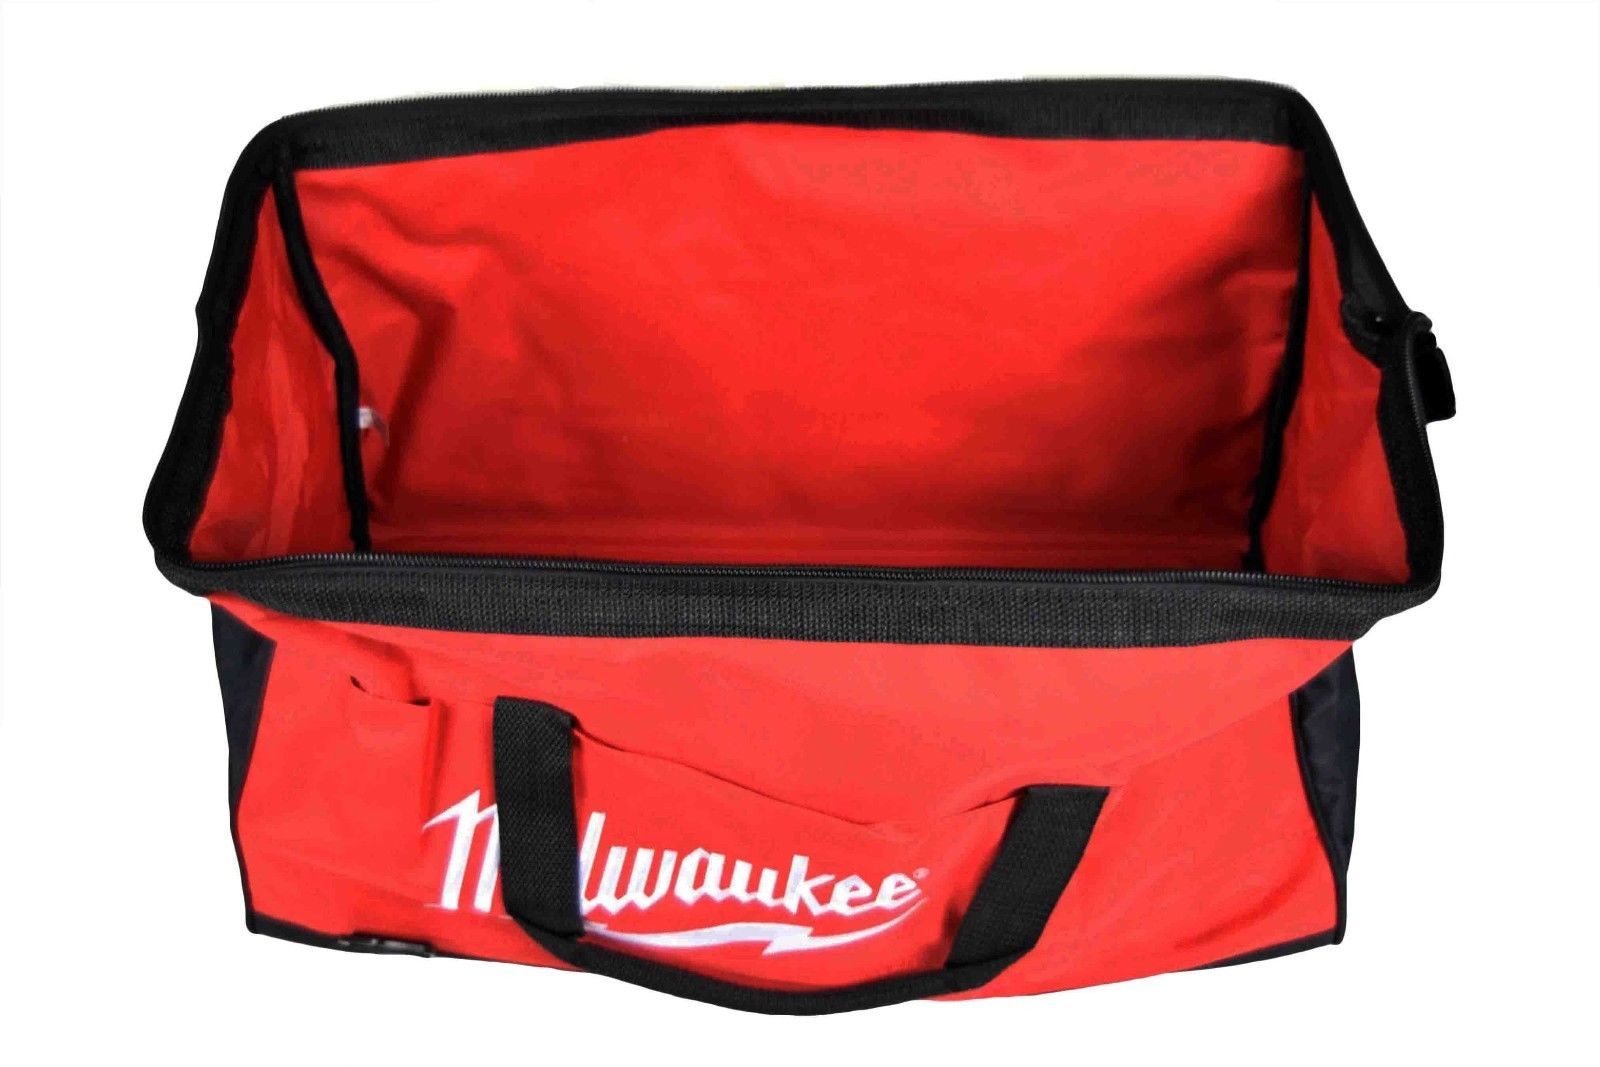 Milwaukee 24-inch Heavy Duty Red/Black Polyester Fabric Tool Bag